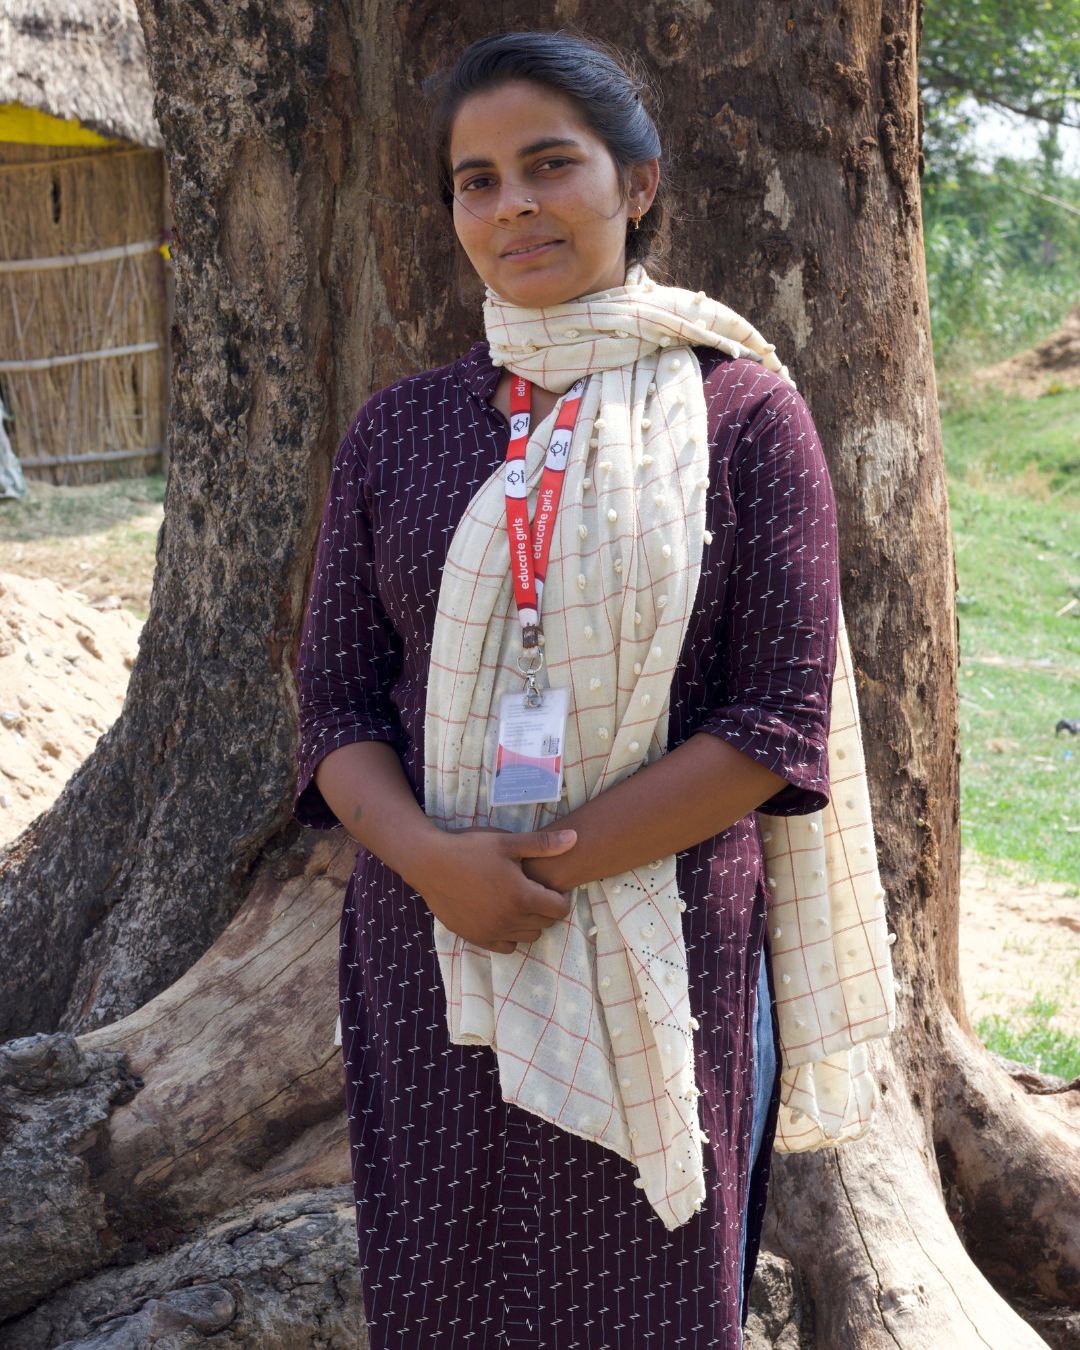 Shilpa becomes a strong advocate against child marriage in her village, sending more girls back to school